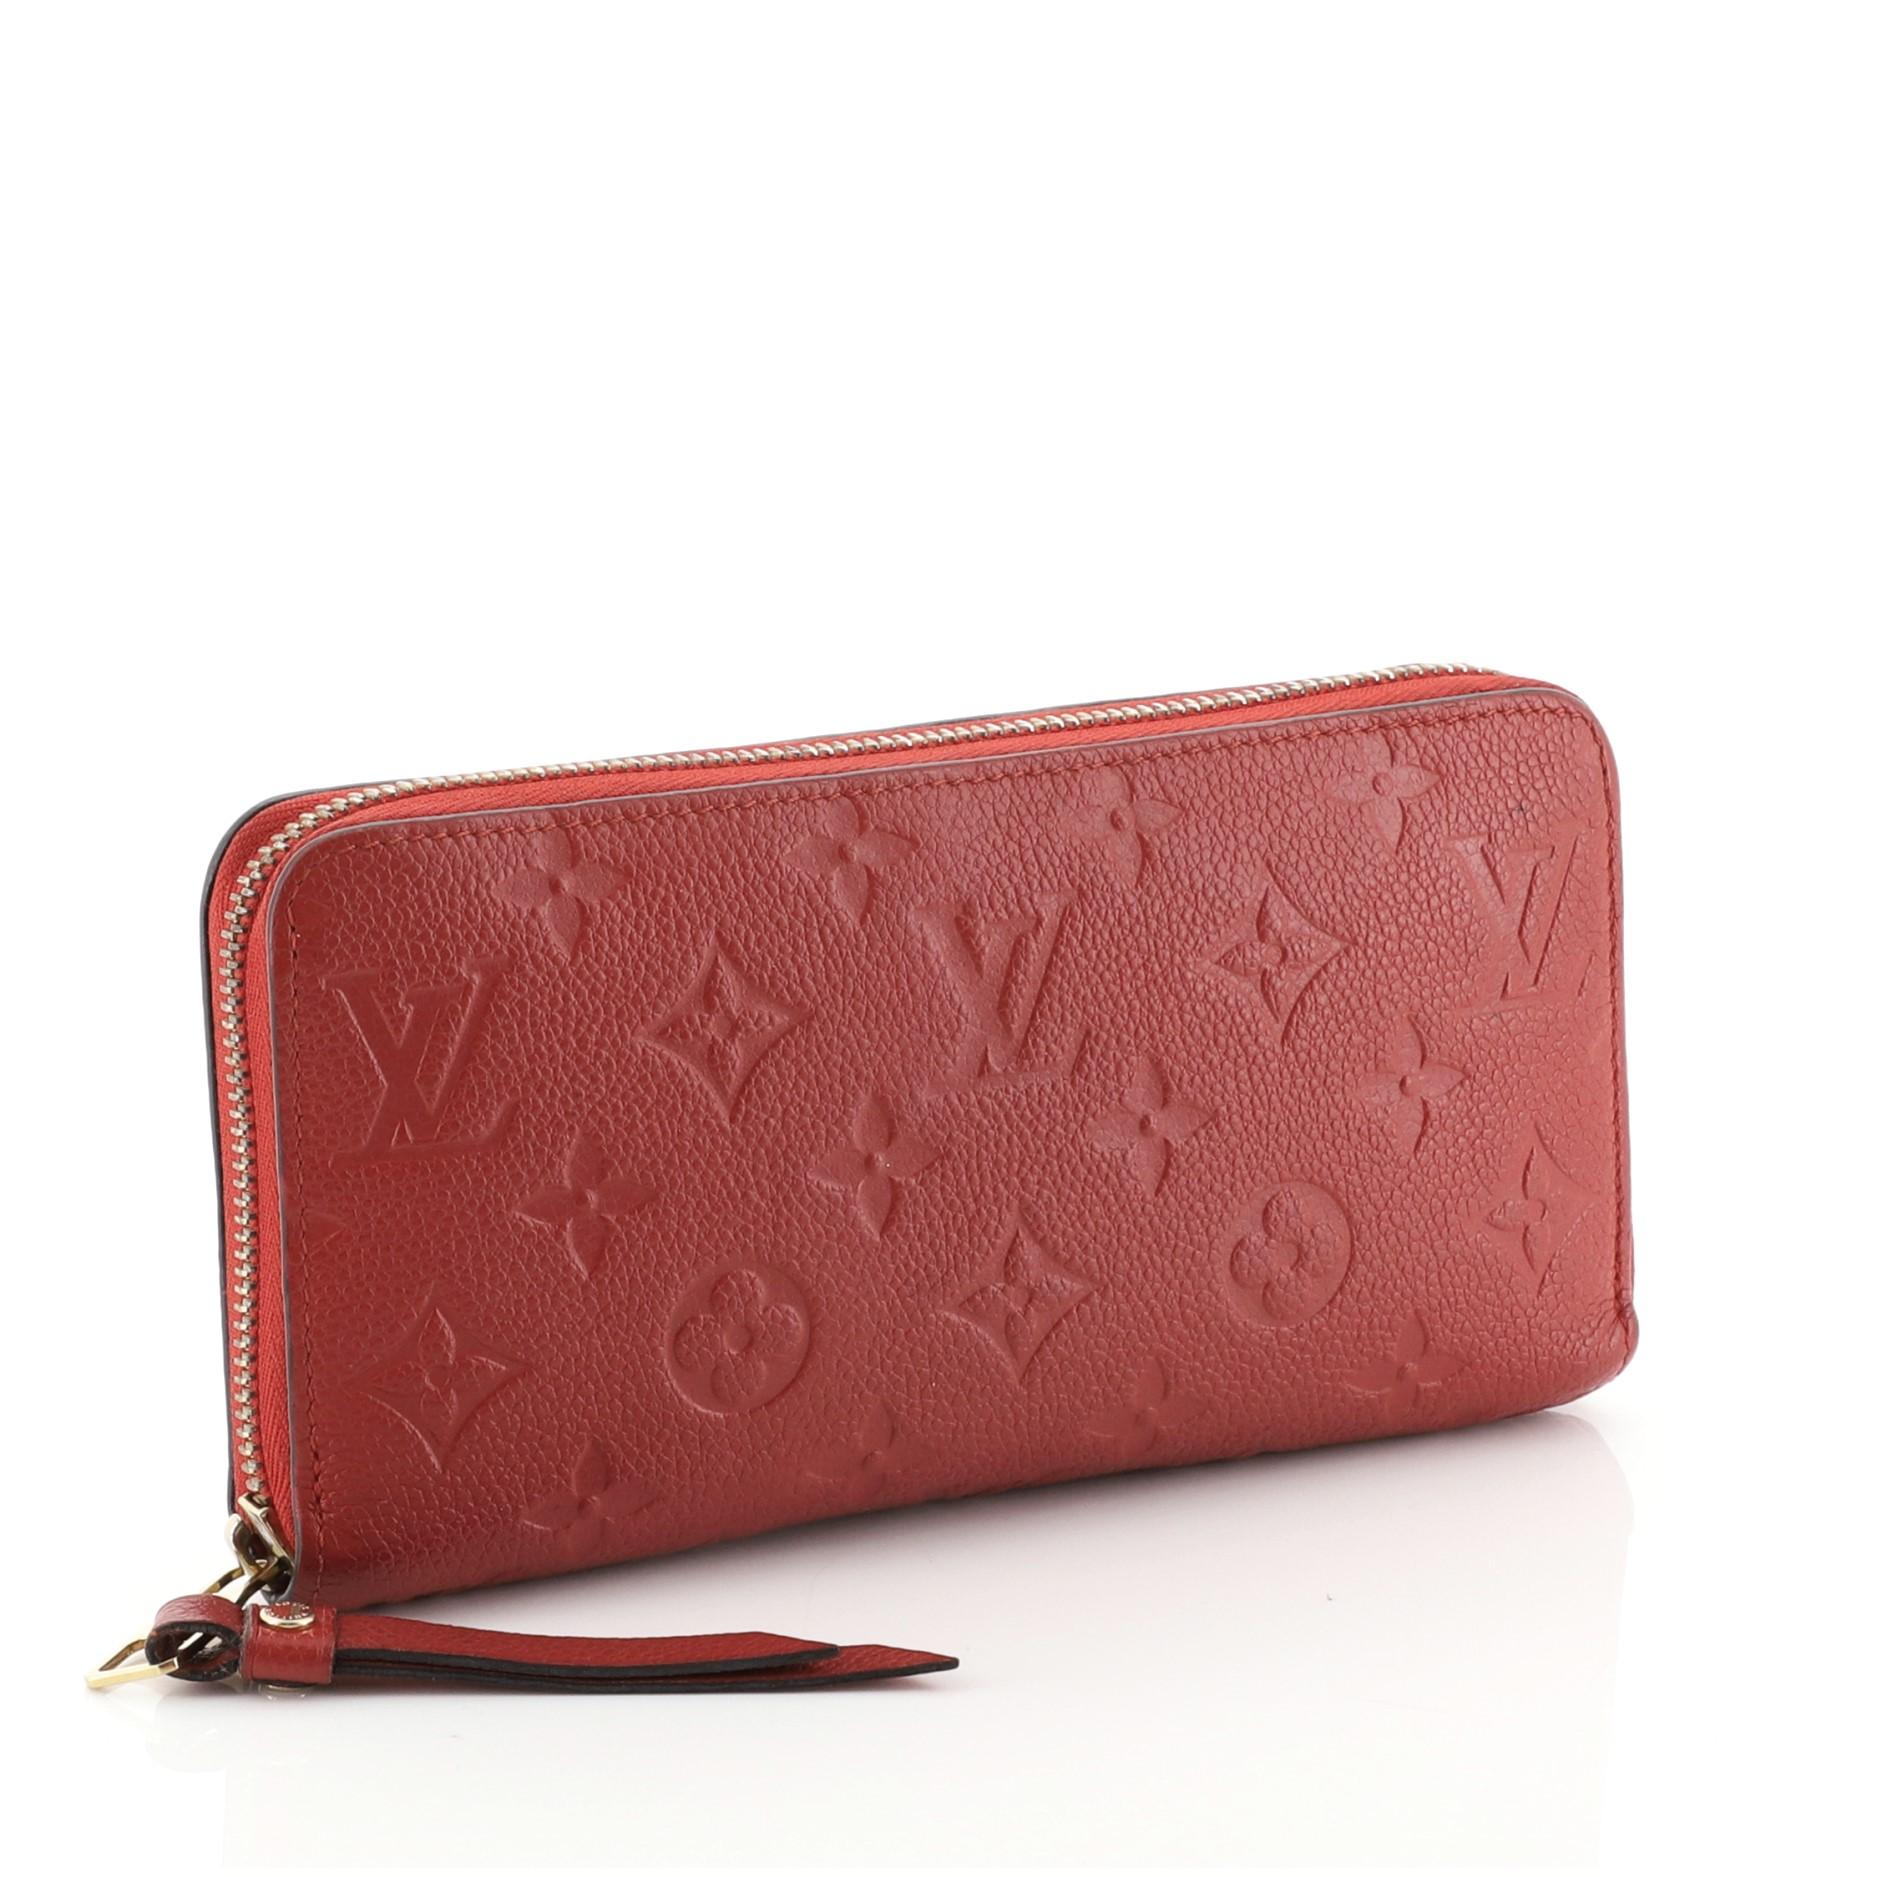 This Louis Vuitton Zippy Wallet Monogram Empreinte Leather, crafted in red monogram empreinte leather, features gold-tone hardware. Its all-around zip closure opens to a red leather interior with a middle zip compartment, slip pocket, and multiple